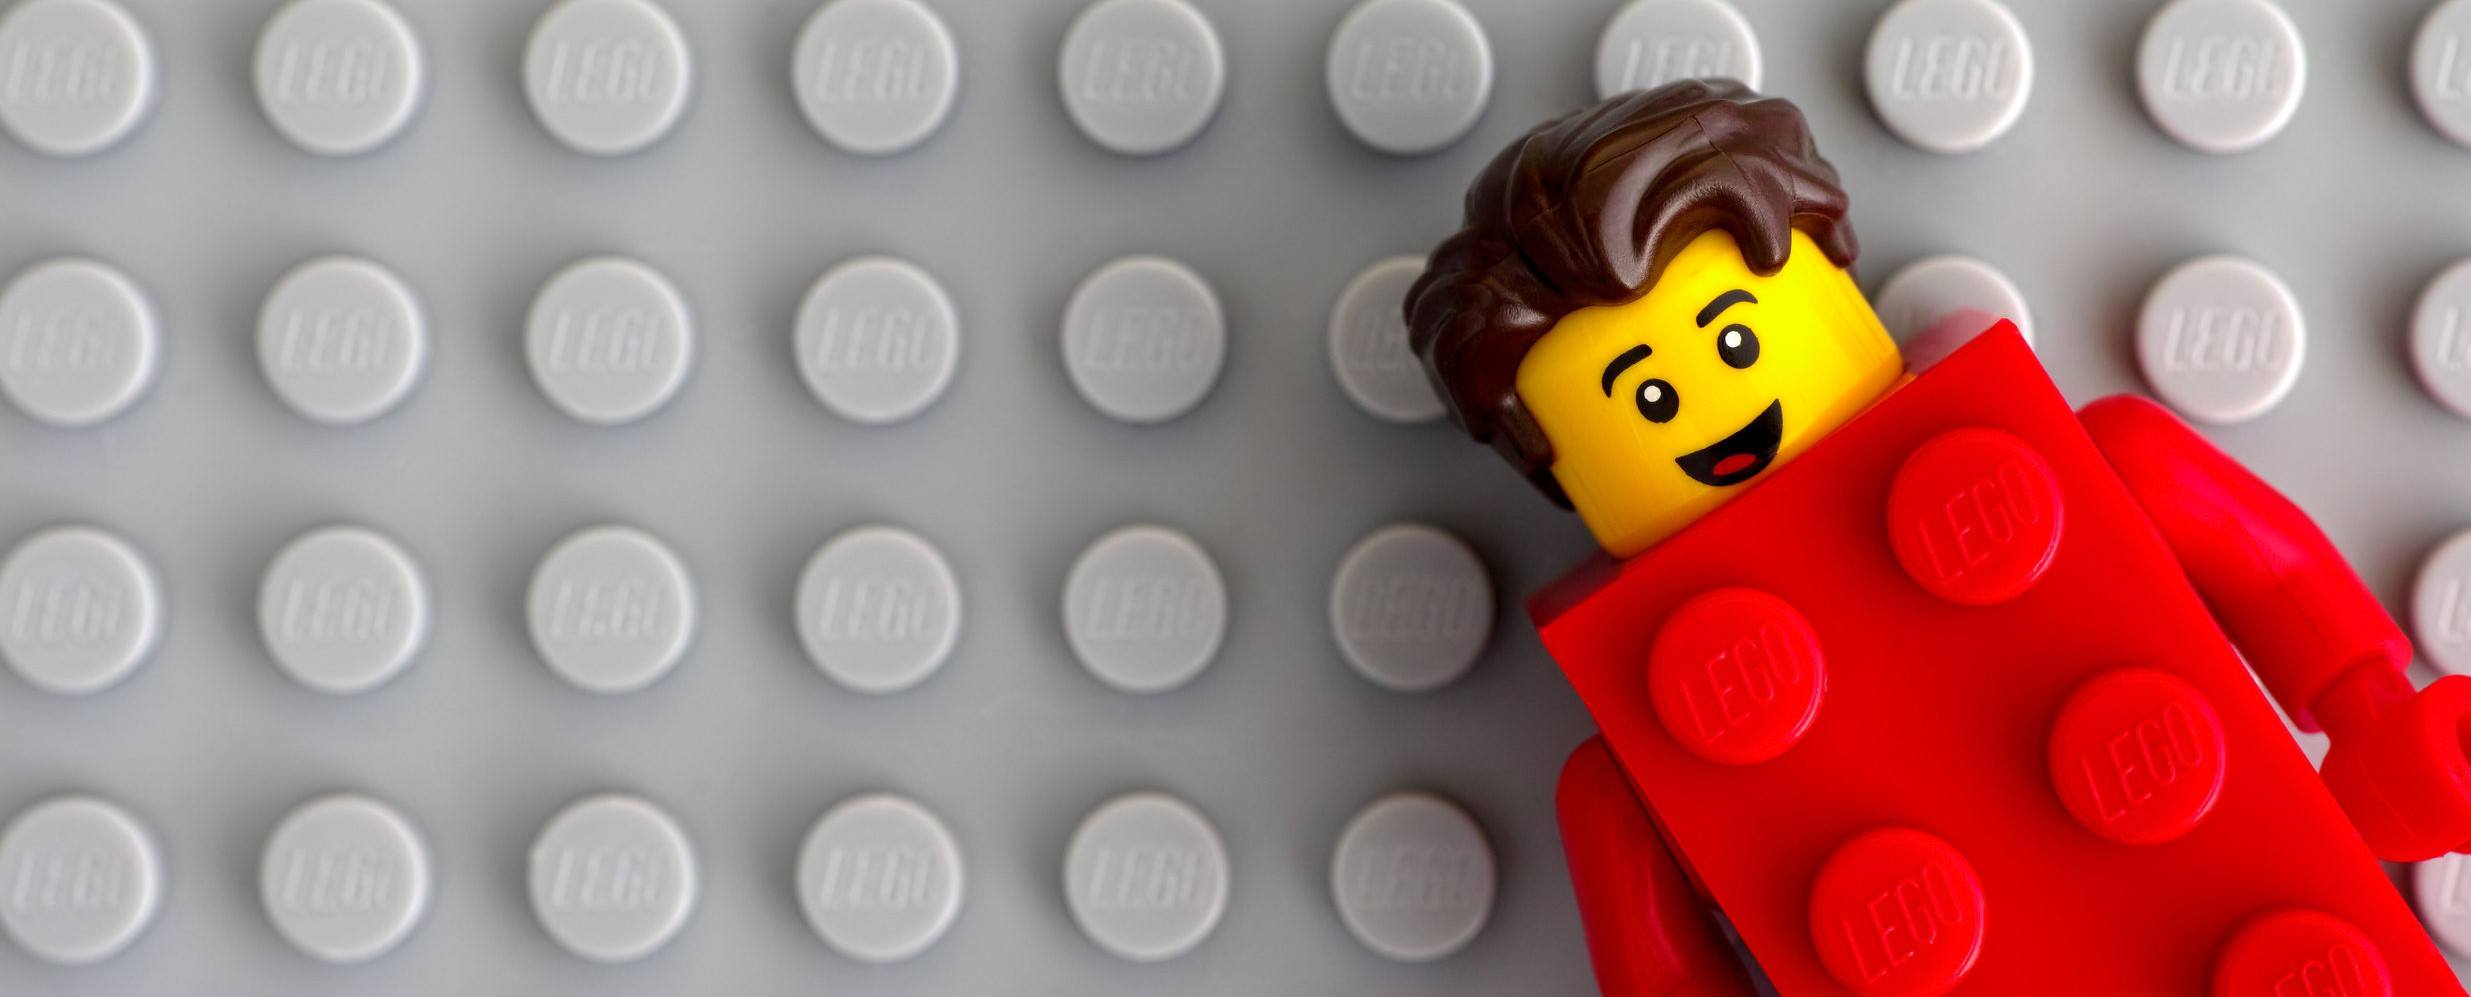 Lego Red Suit Brick Guy minifigure on gray baseplate background.